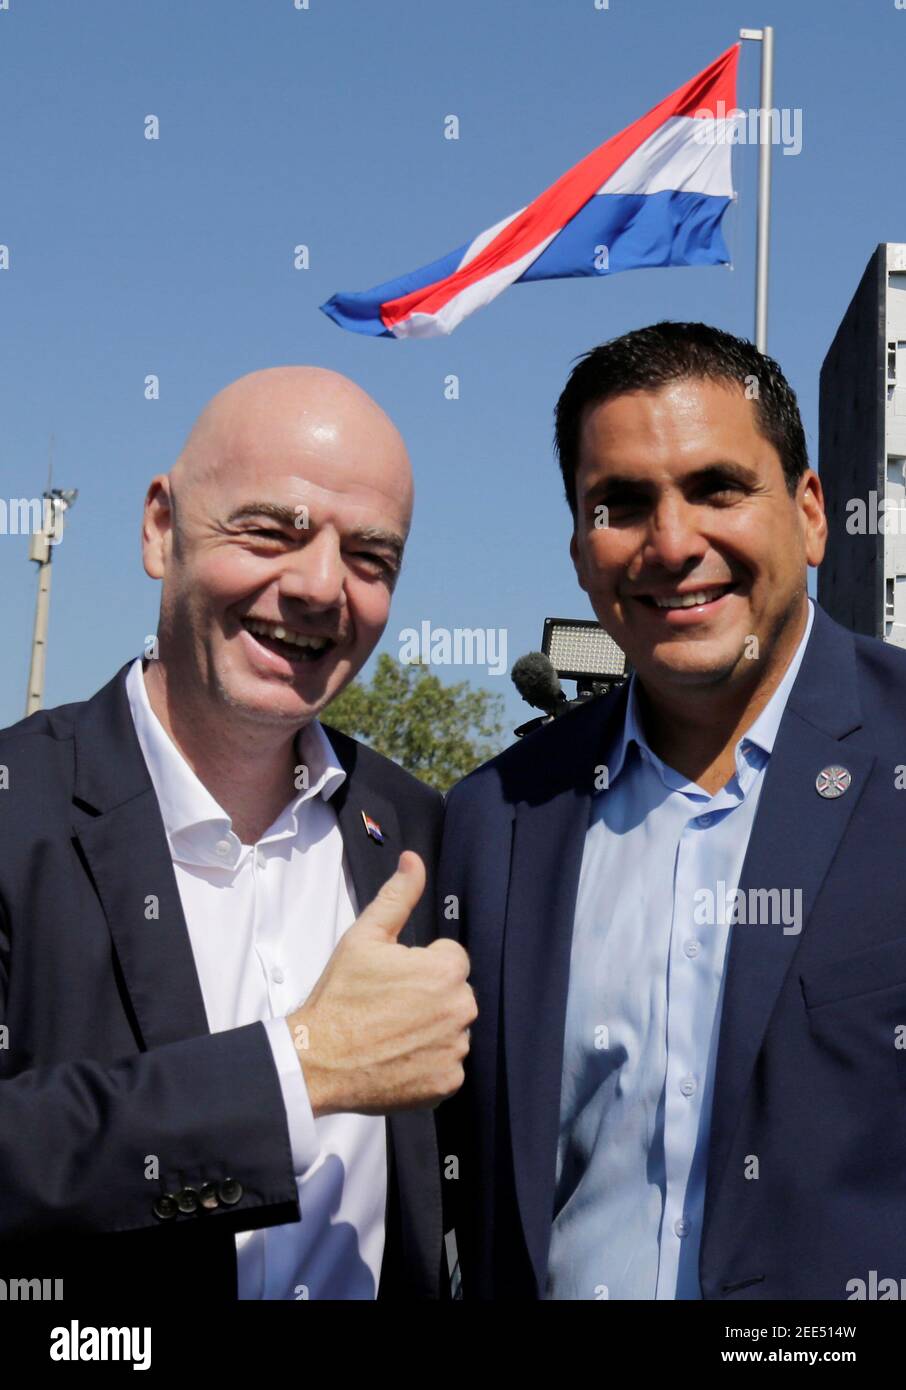 Inauguration of football facilities in Paraguay - Paraguayan Football Association Headquarters Luque, Paraguay - November 9, 2019       Robert Harrison, President of the Paraguayan Football Association with Gianni Infantino, FIFA president during the inauguration of their new headquarters in Luque   REUTERS/Jorge Adorno Stock Photo